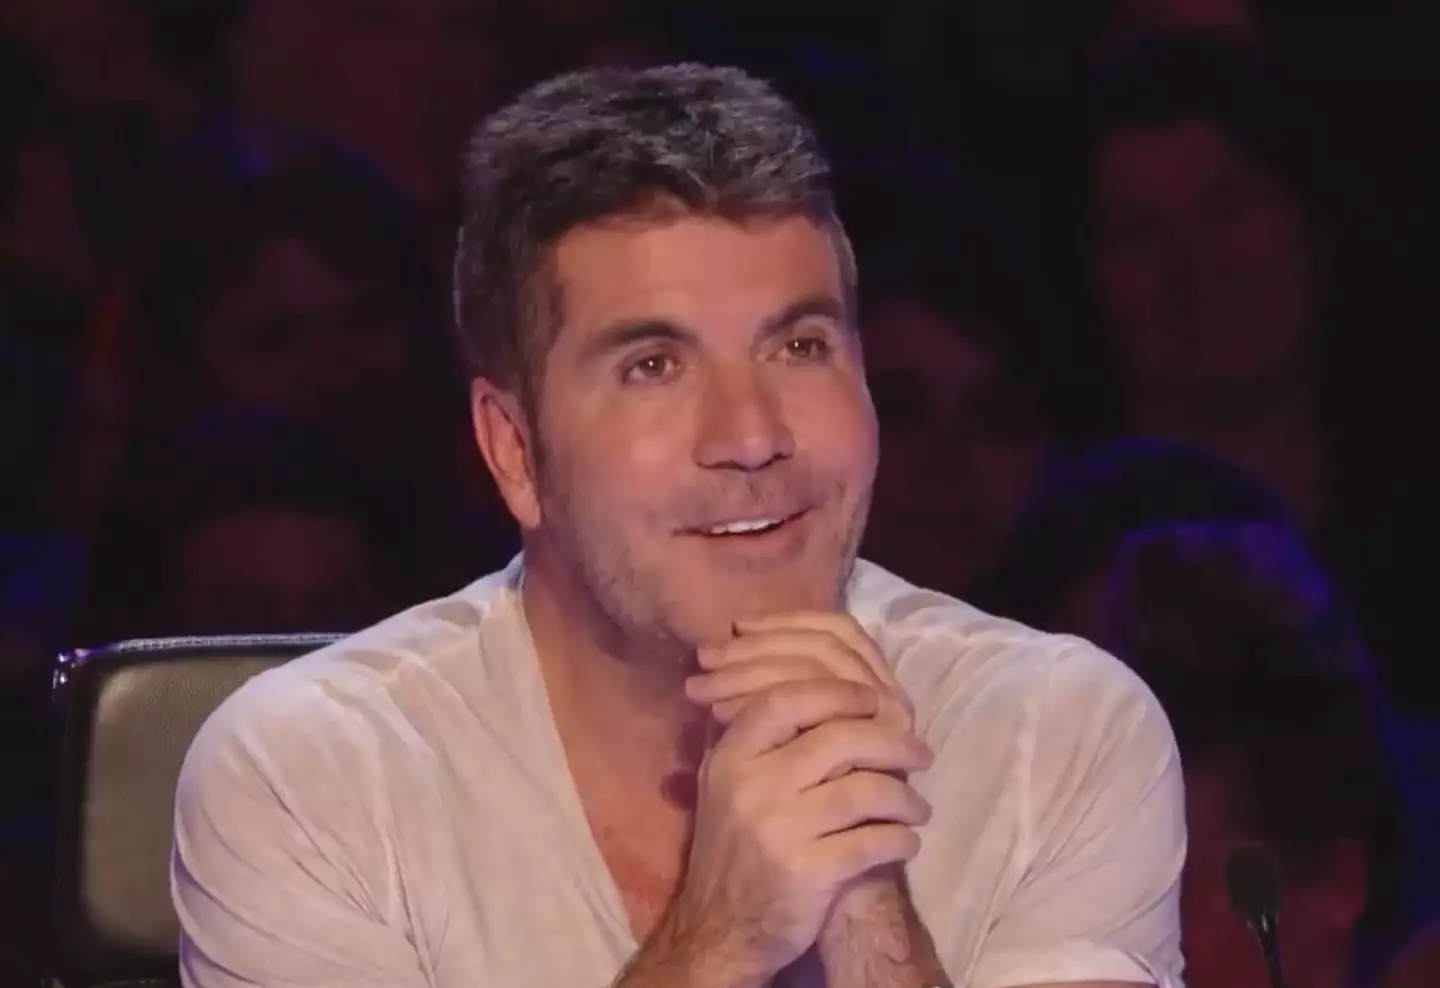 Cowell said he doesn't 'condone' the comments.